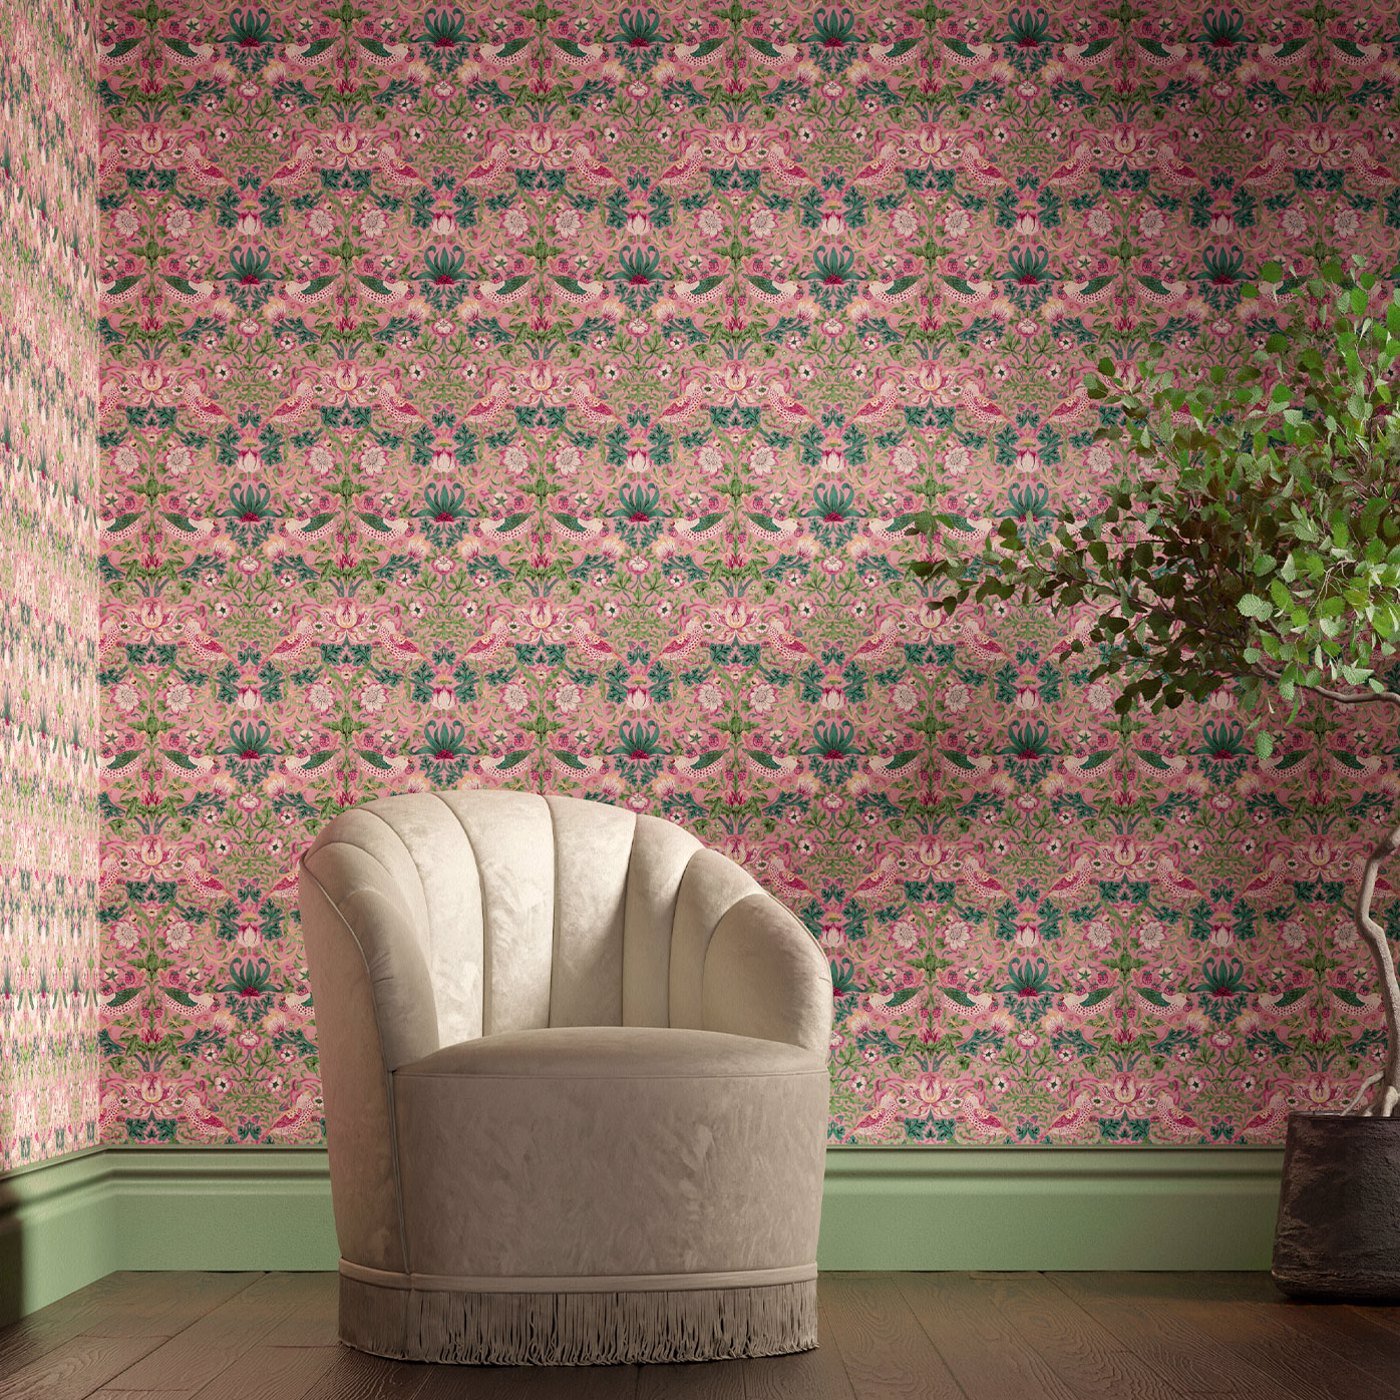 Strawberry Thief might be arguably William Morris's most famous pattern. The Bedford Park collection has two new colors available. Miami Strip is to die for! Love a #pinkwallpaper #strawberrytheif #morrisandco #classicwallpaper